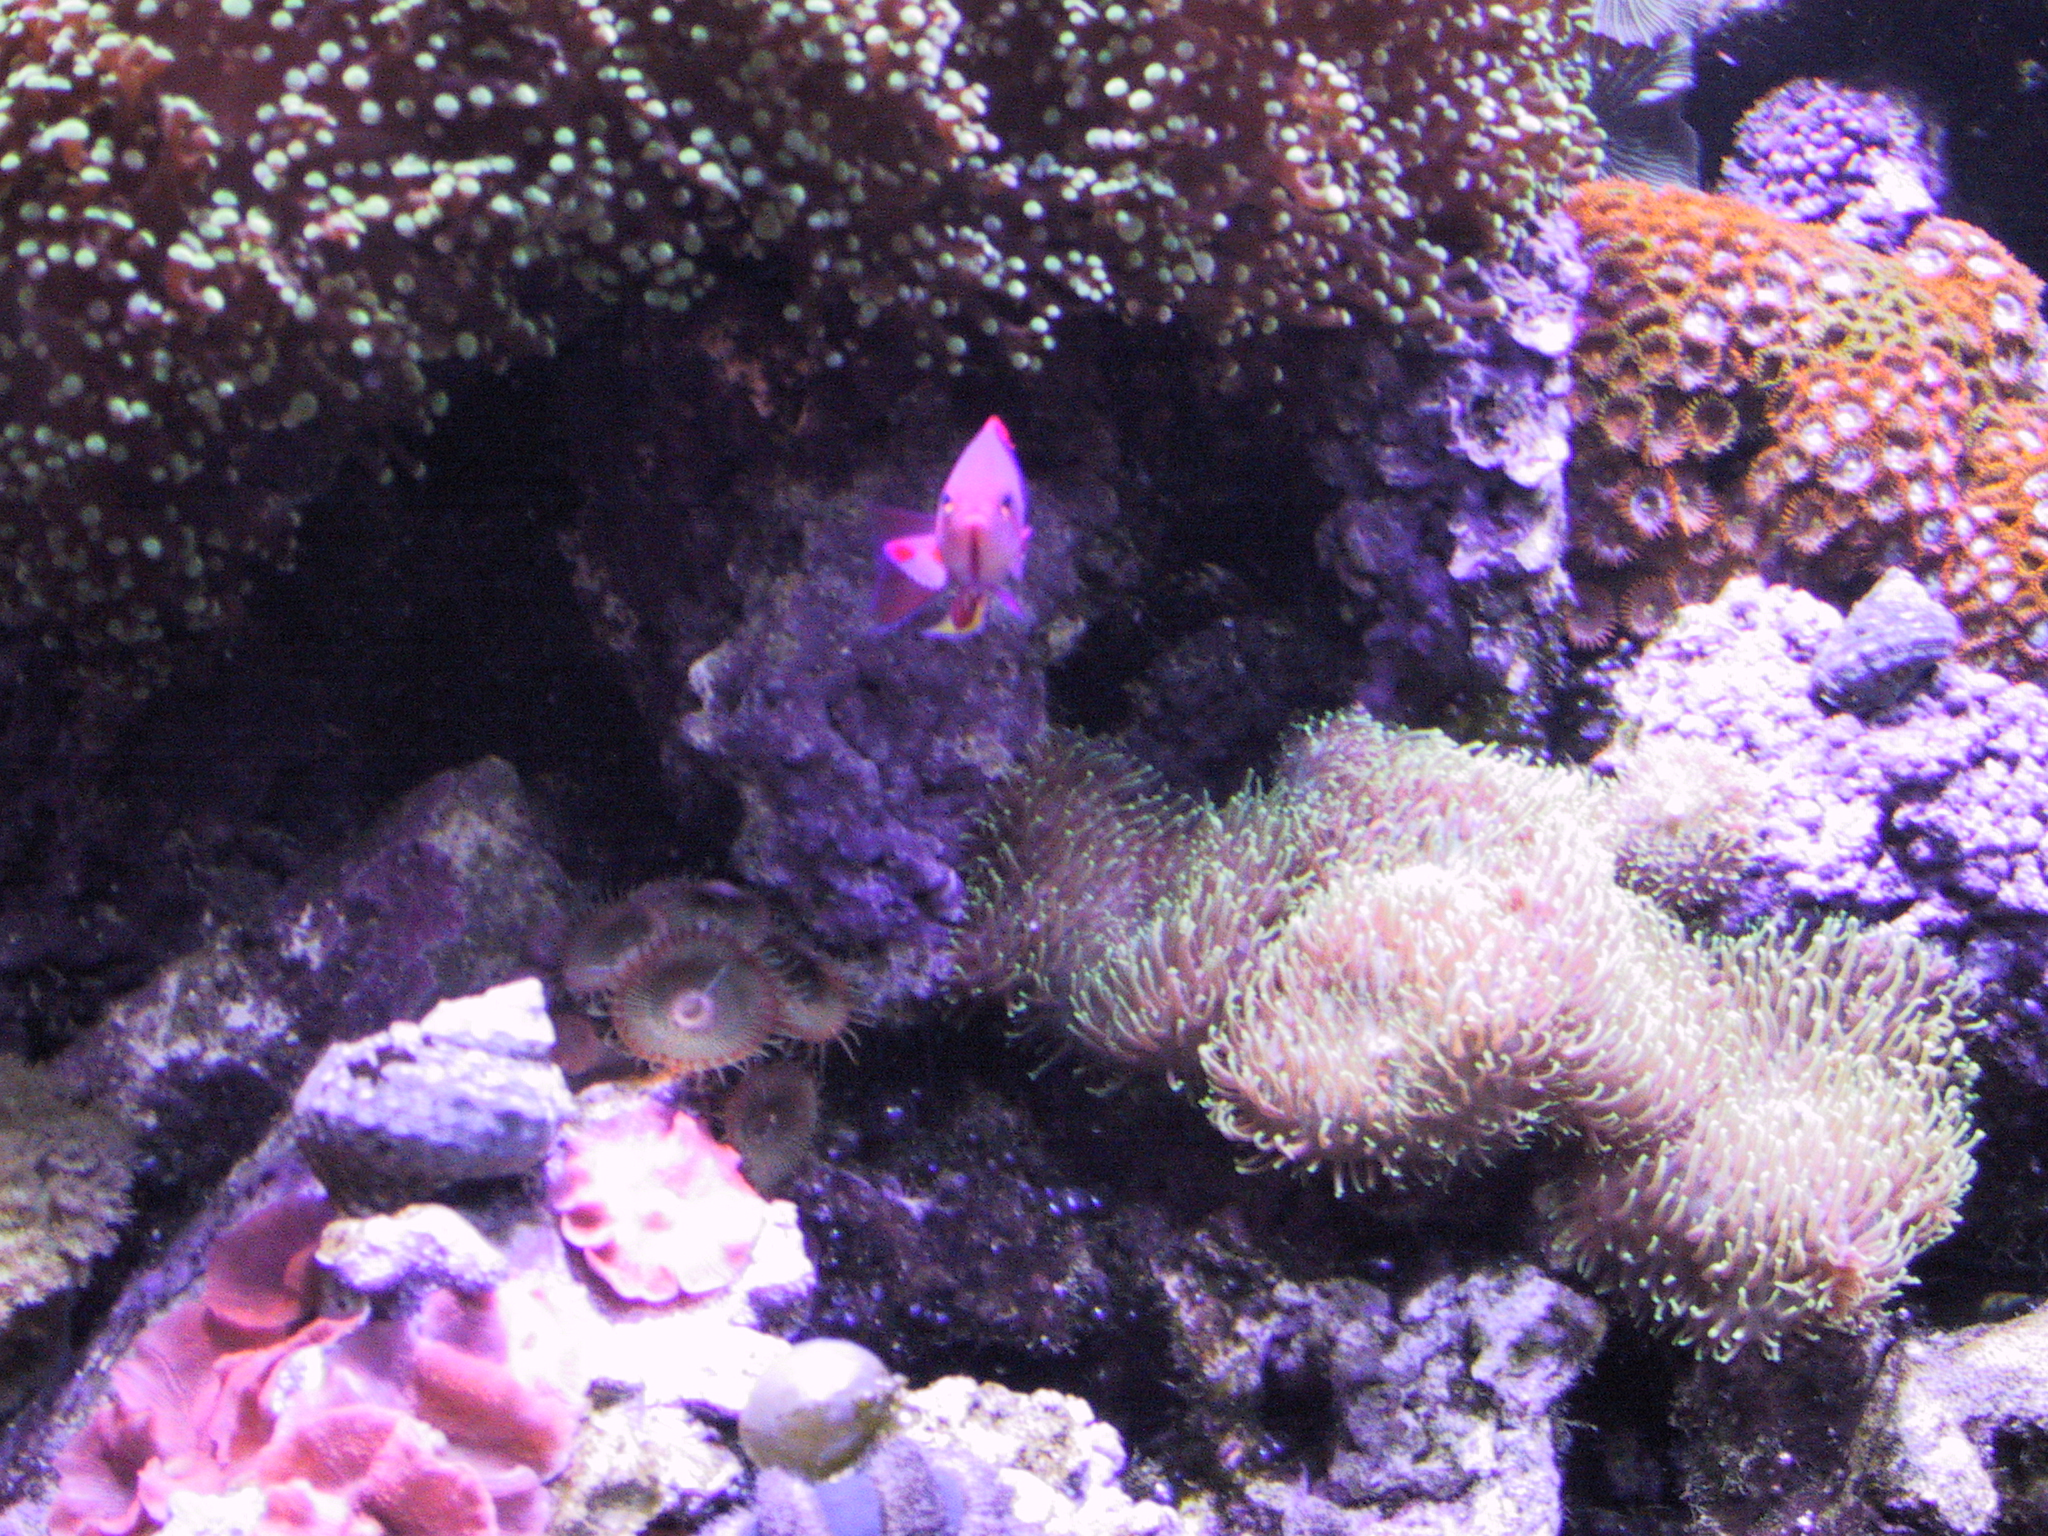 two fish swim among the many colorful corals